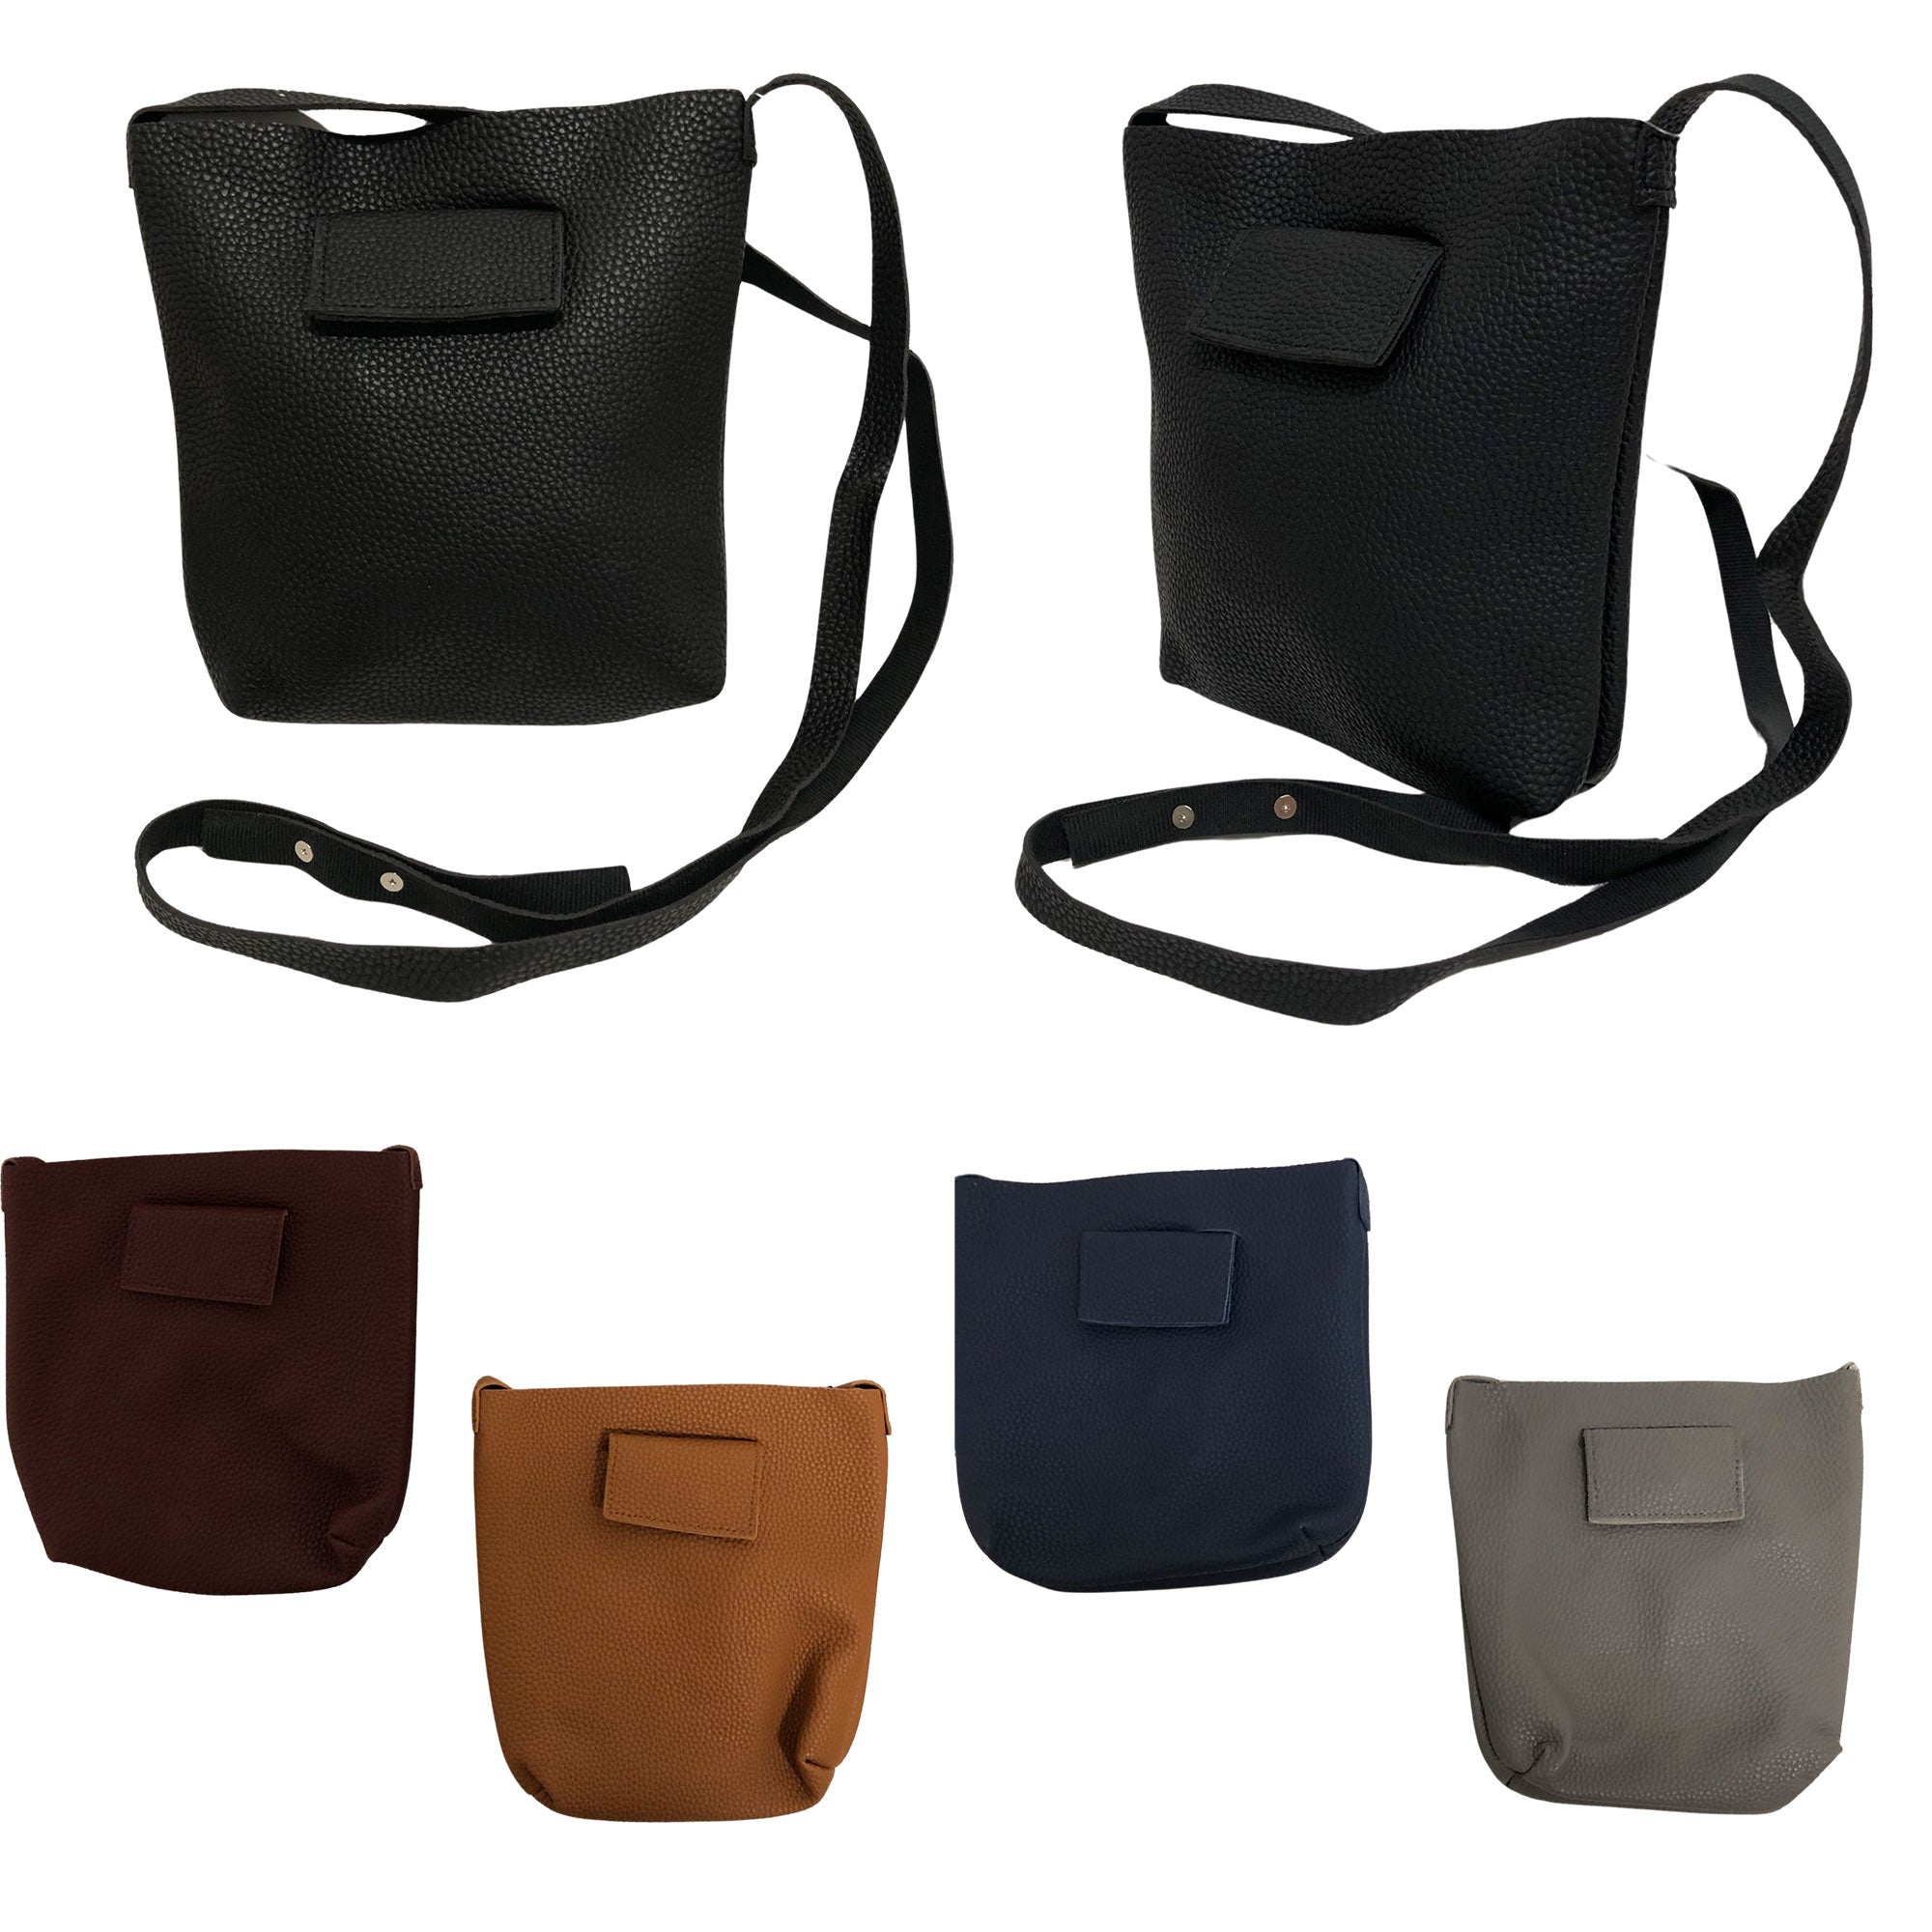 CLEARANCE CROSSBODY BAG FOR WOMEN (CASE OF 48 - $1.75 / PIECE)  Assorted Color Wholesale Crossbody Bag SKU: 336-DK-48